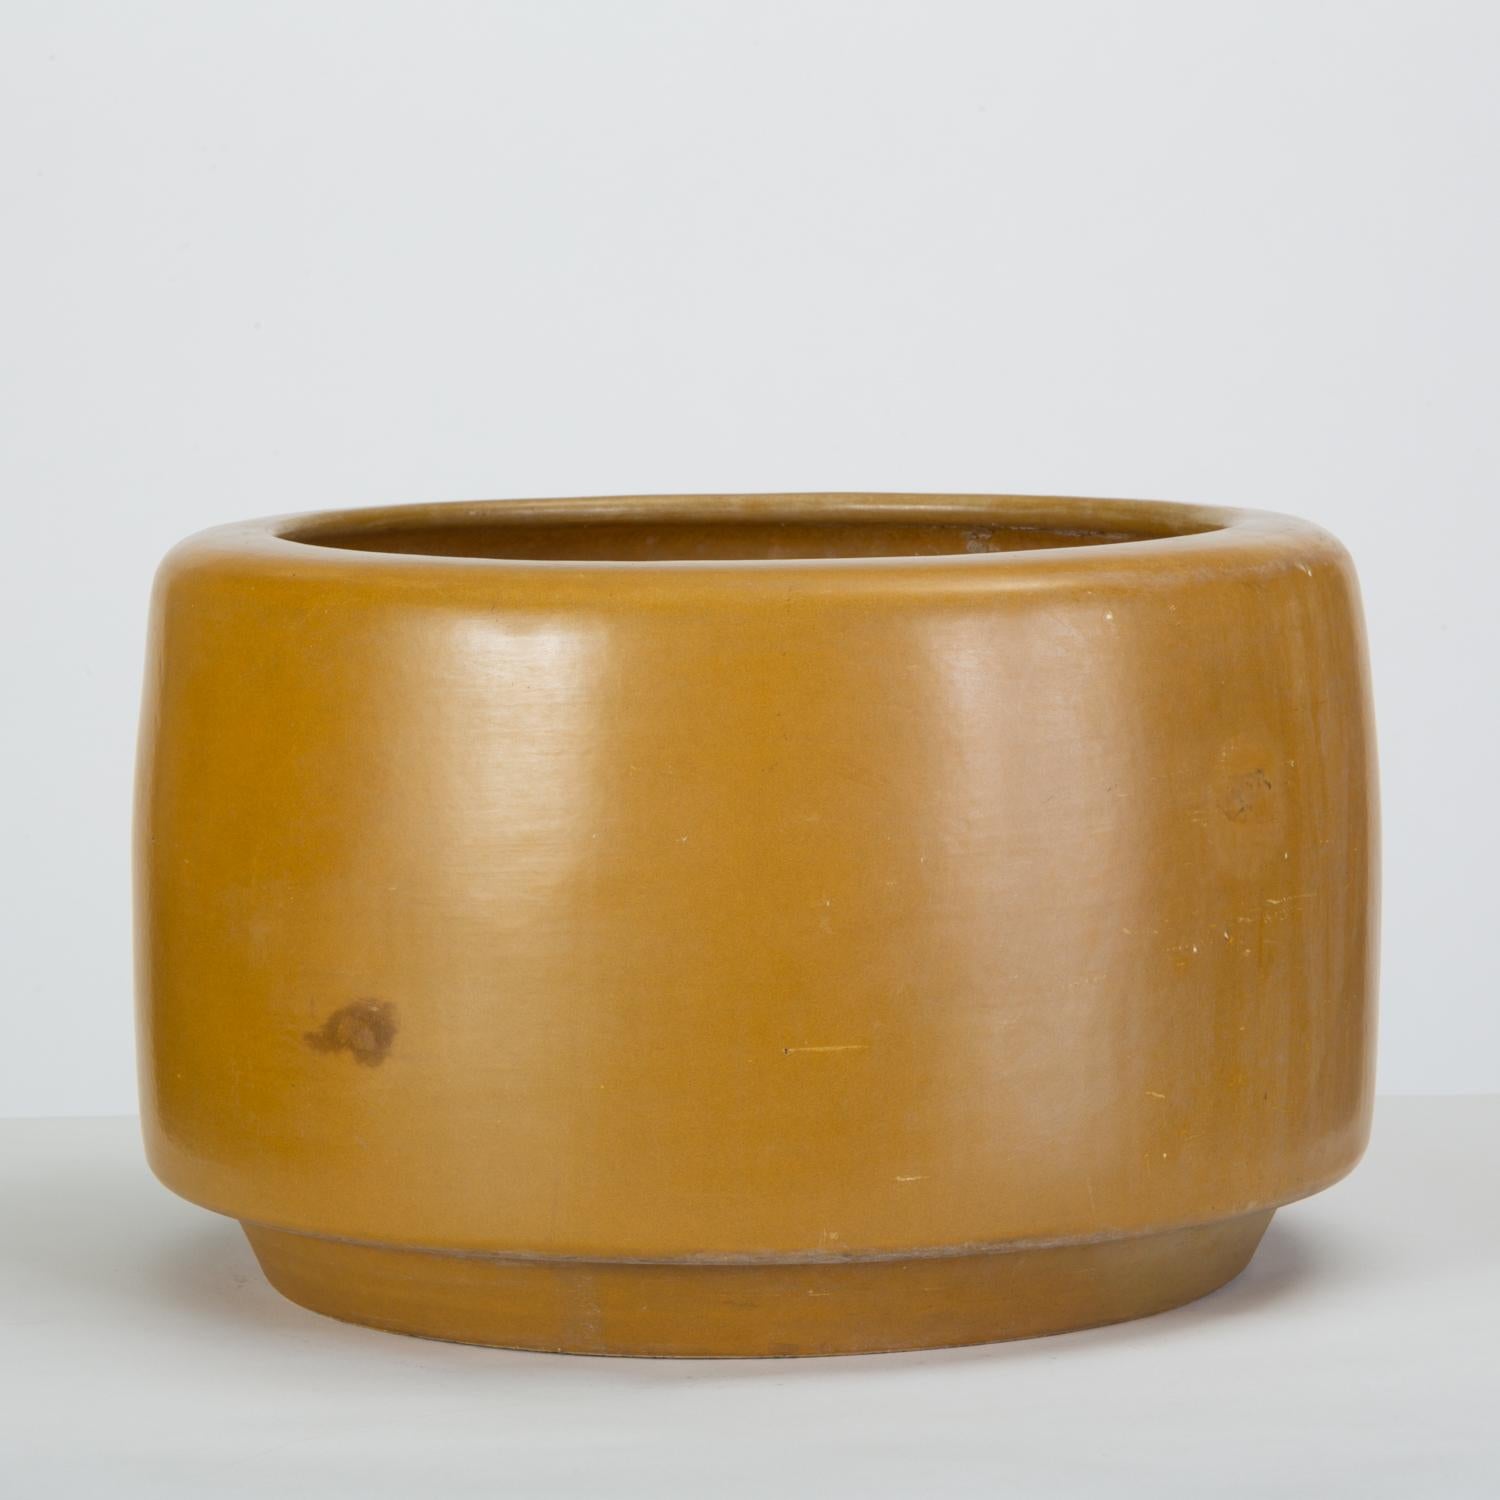 American CP-17 Tire Planter by John Follis for Architectural Pottery in Yellow Glaze